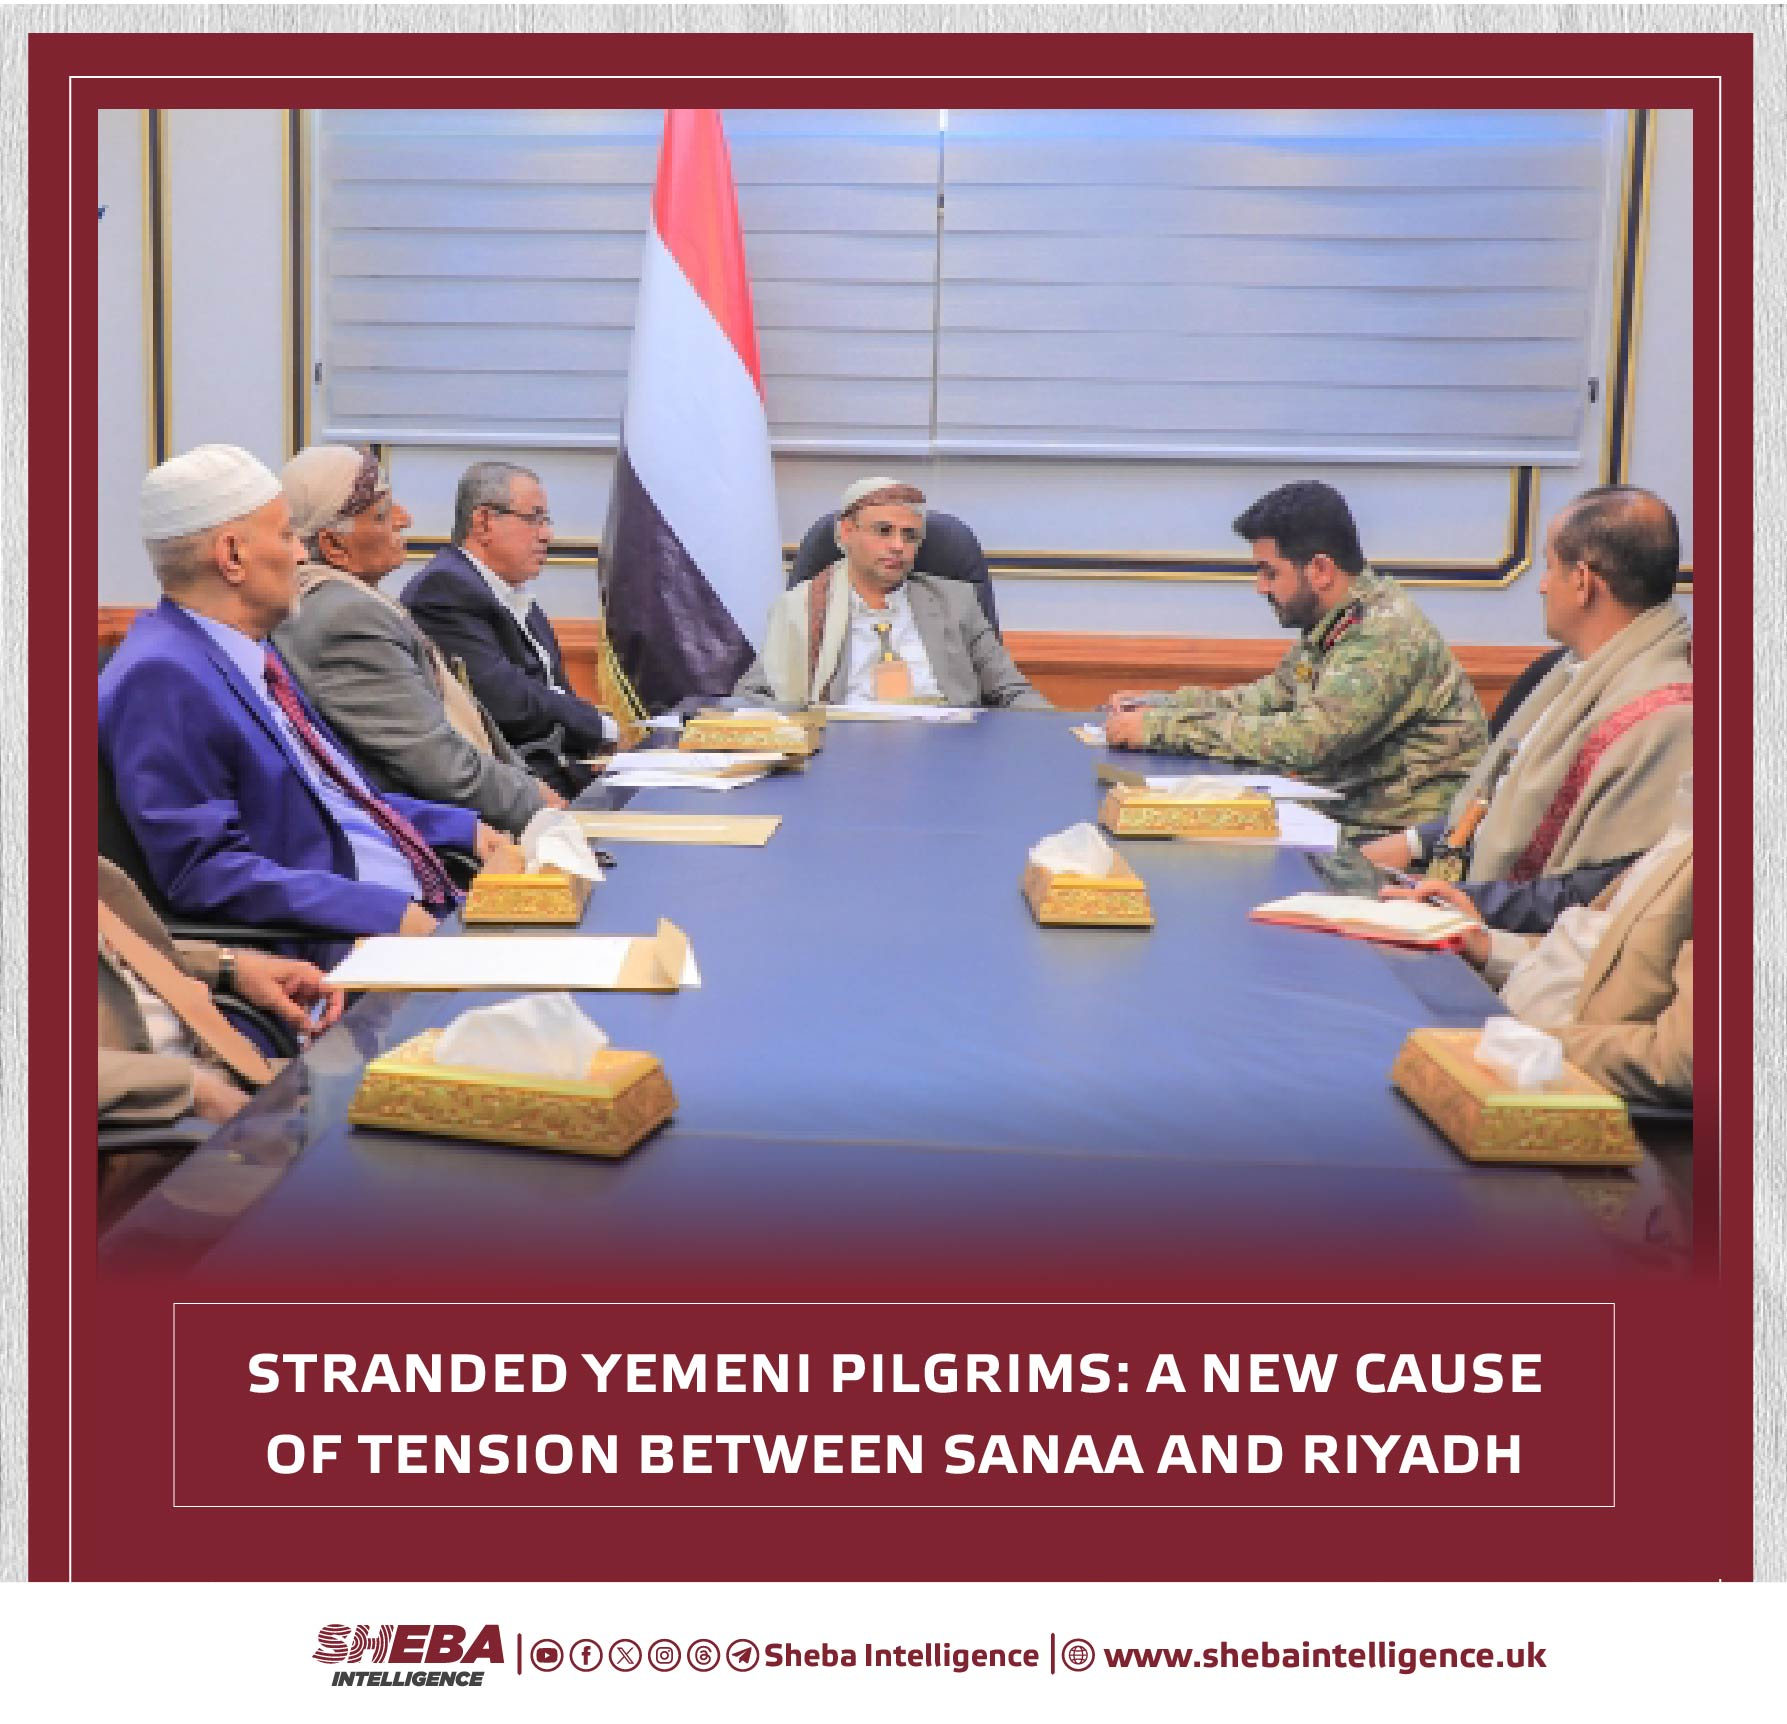 Stranded Yemeni Pilgrims: A New Cause of Tension Between Houthi and Riyadh